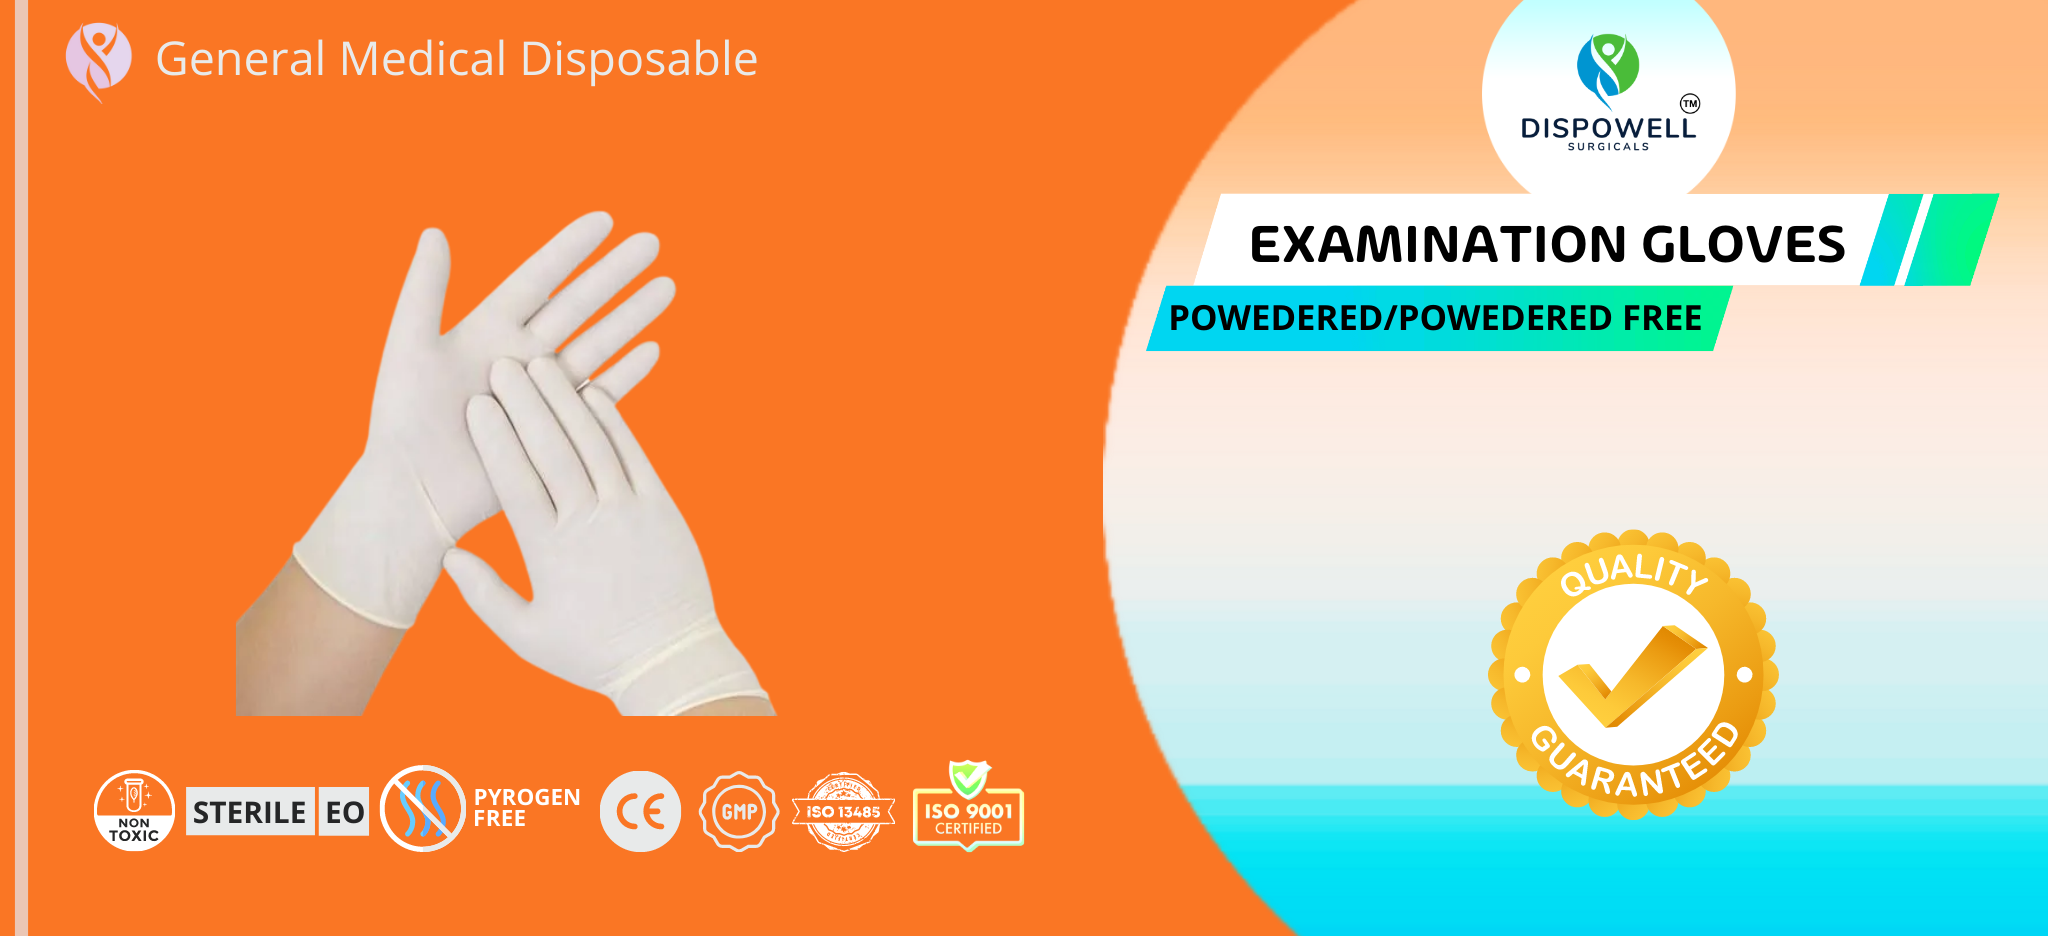 Latex Examination Gloves powedered and powder free